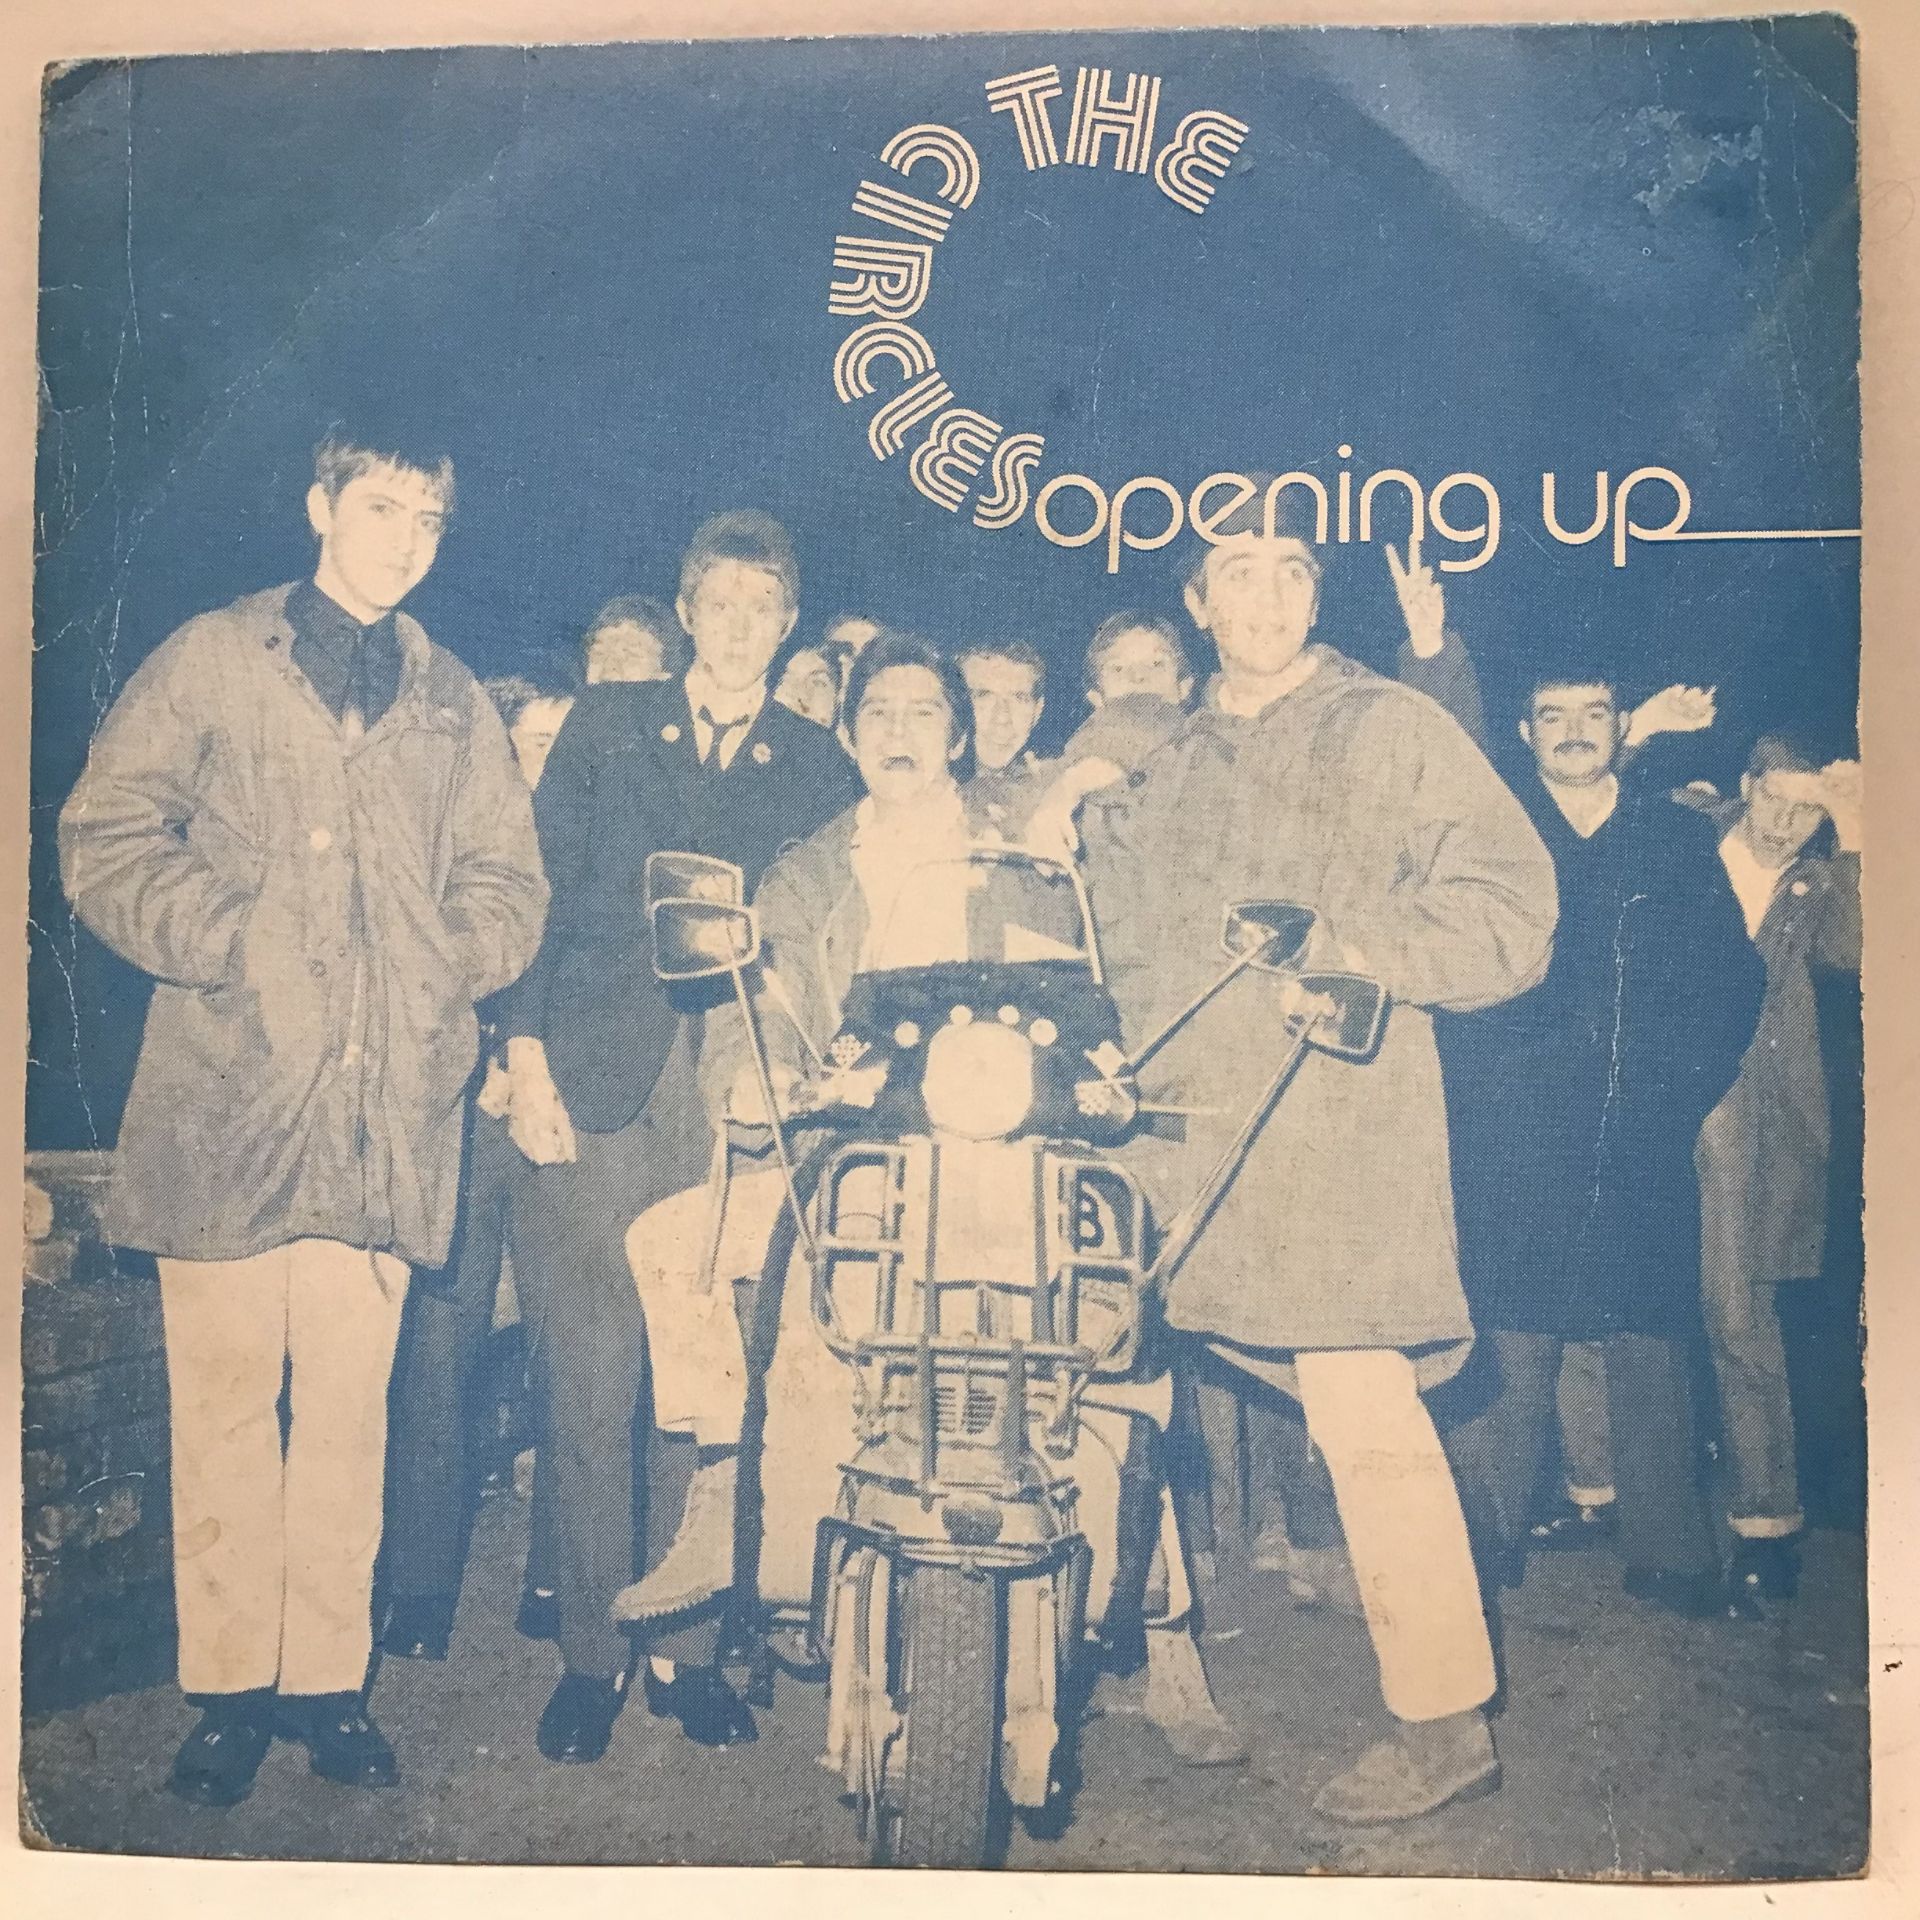 THE CIRCLES ‘OPENING UP’ RARE 7” SINGLE. Original UK 45 issued in 1979 by Graduate Records GARD 4.